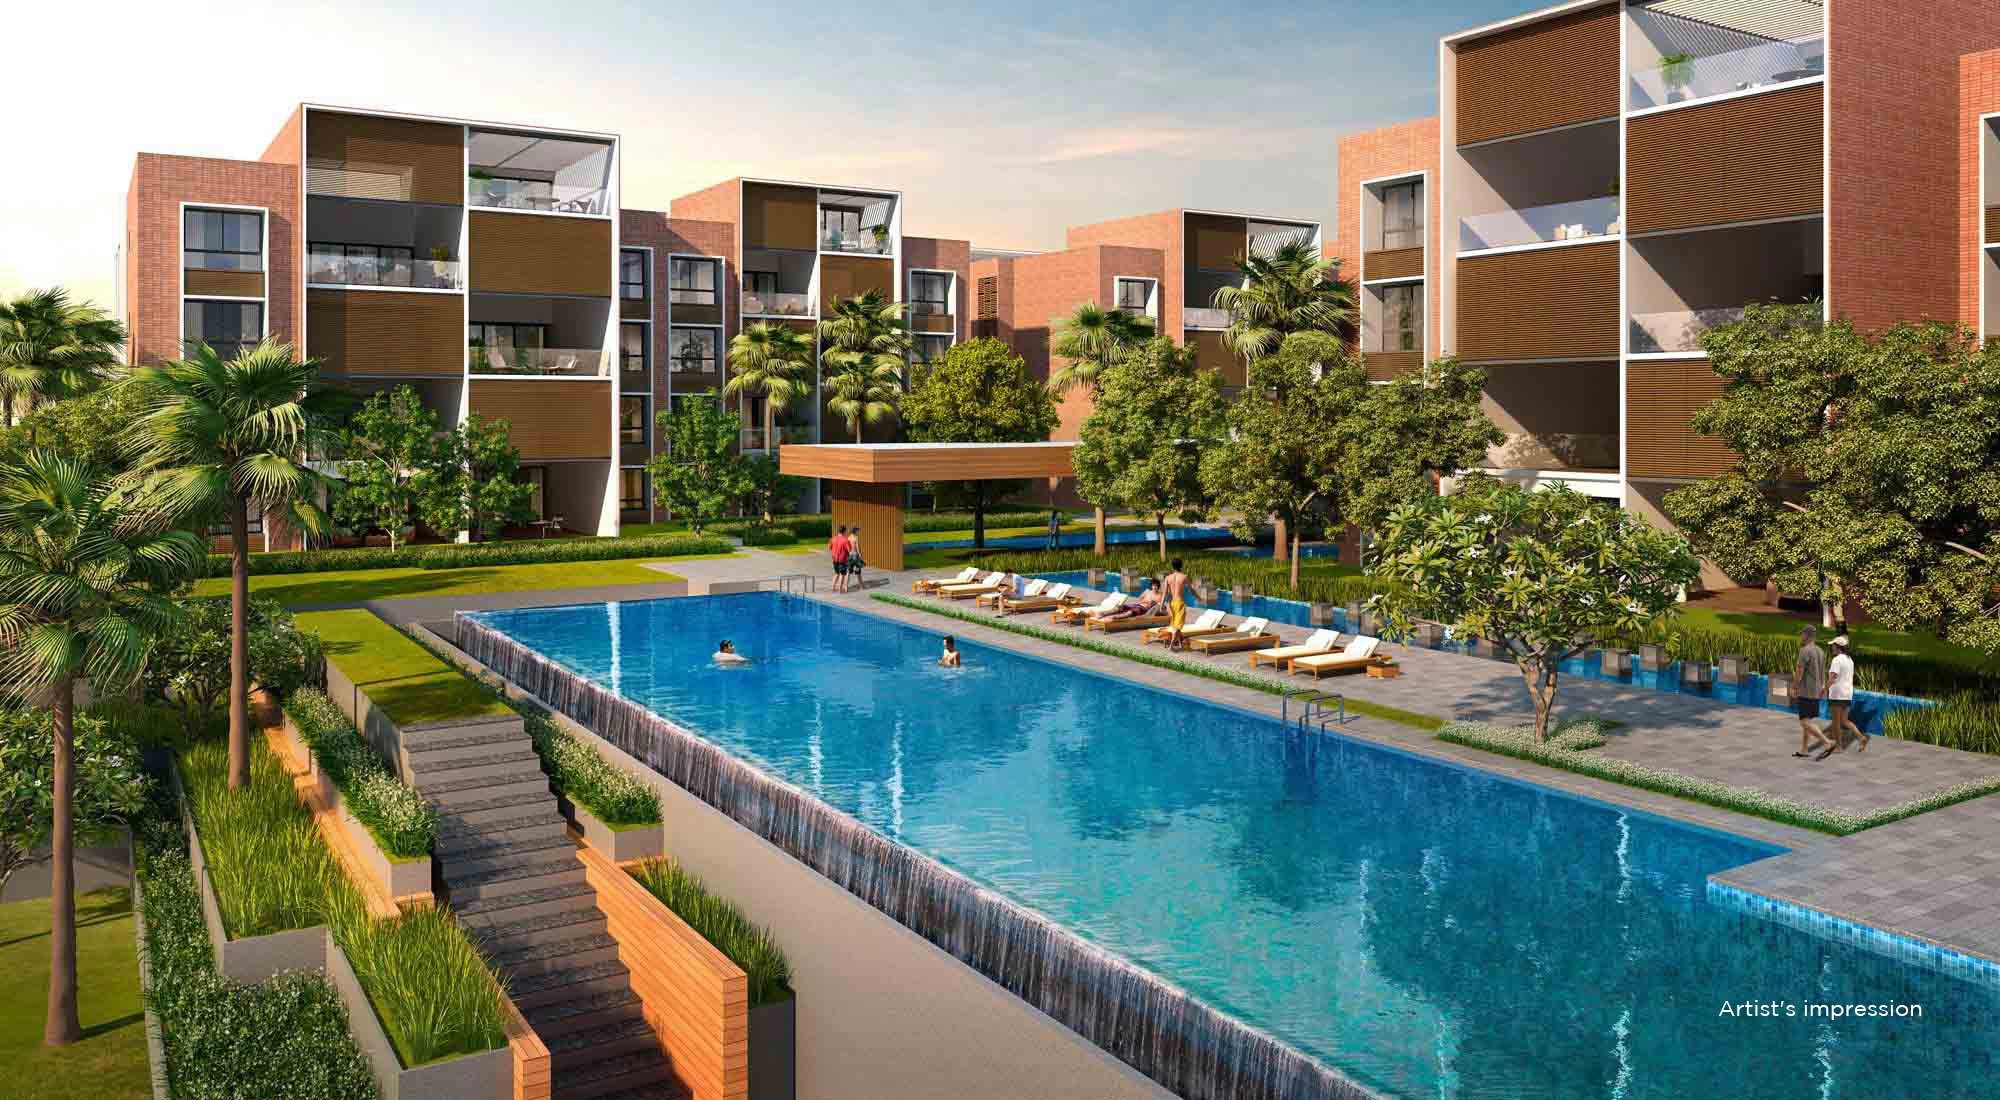 New Flats in Pune Buy Flats in Pune at Best Price Marvel Piazza